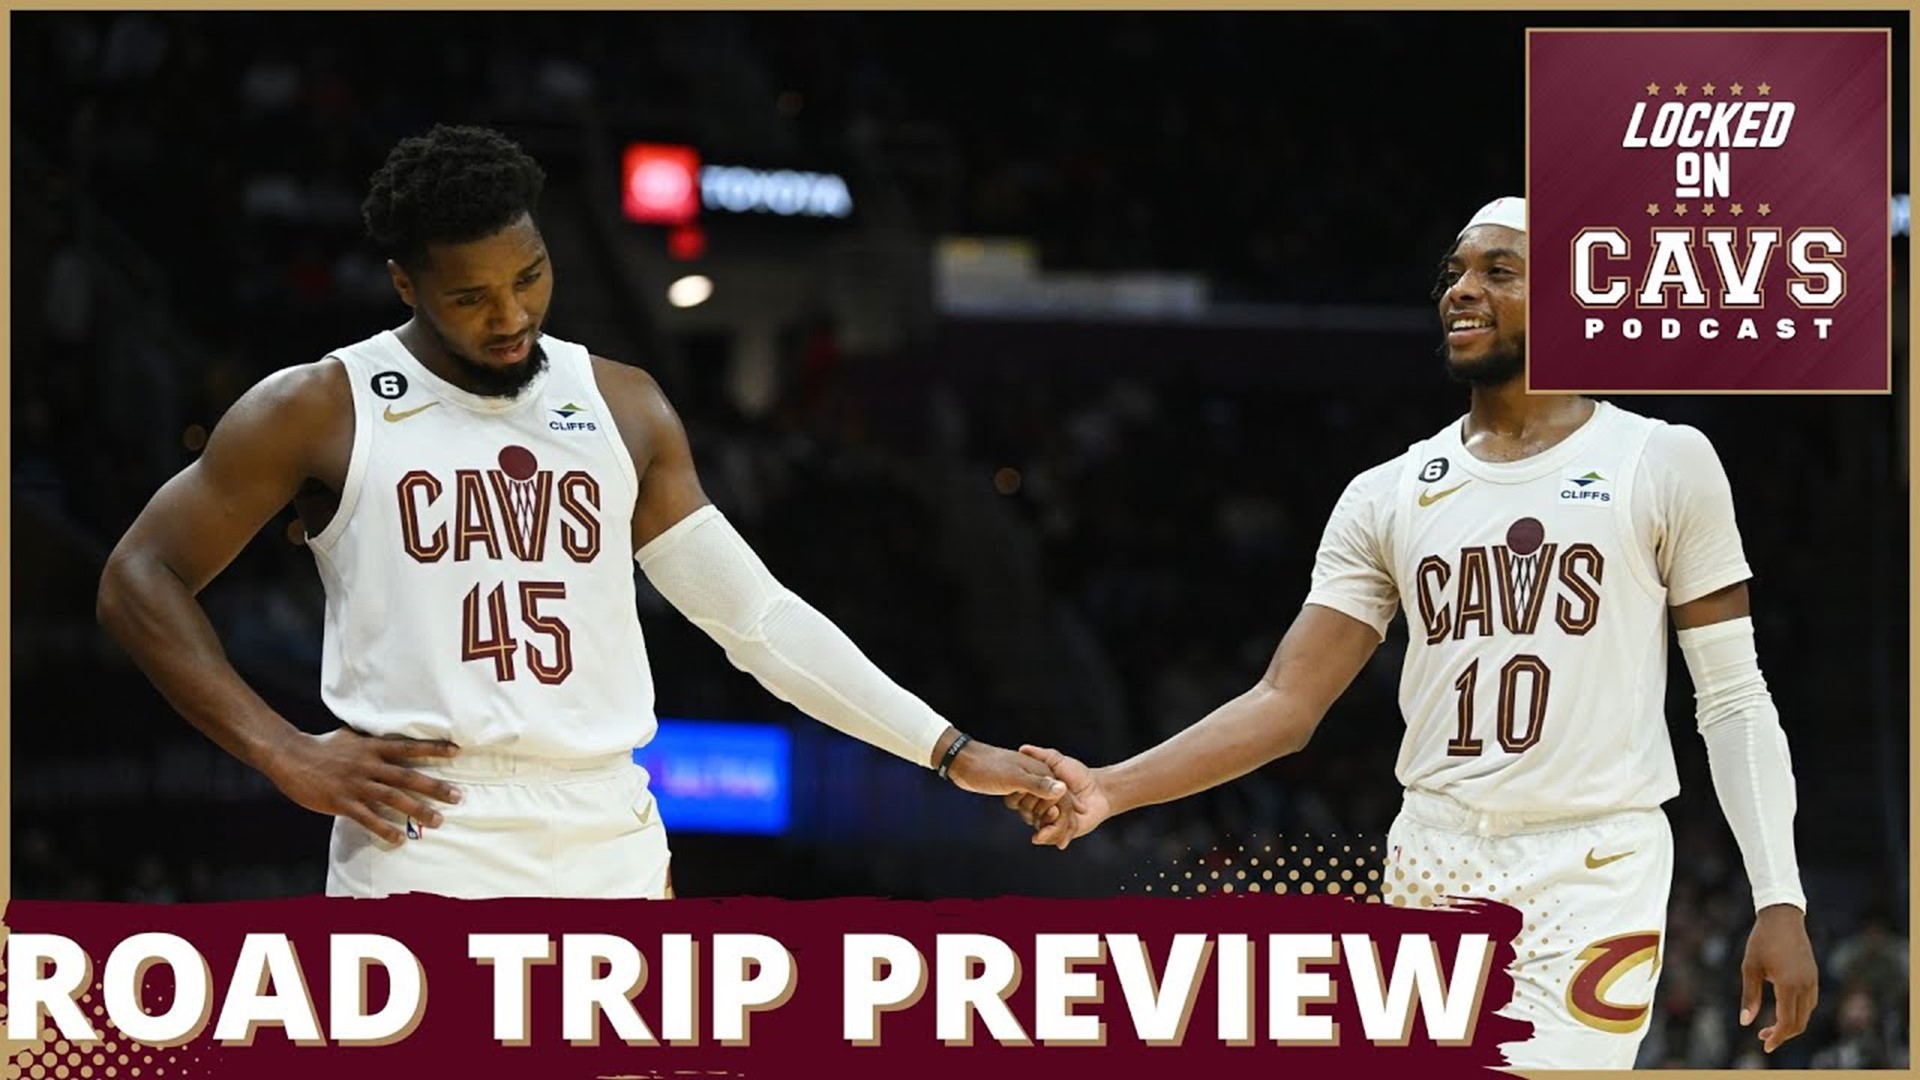 Chris Manning and Evan Dammarell look at what’s ahead for the Cleveland Cavaliers.